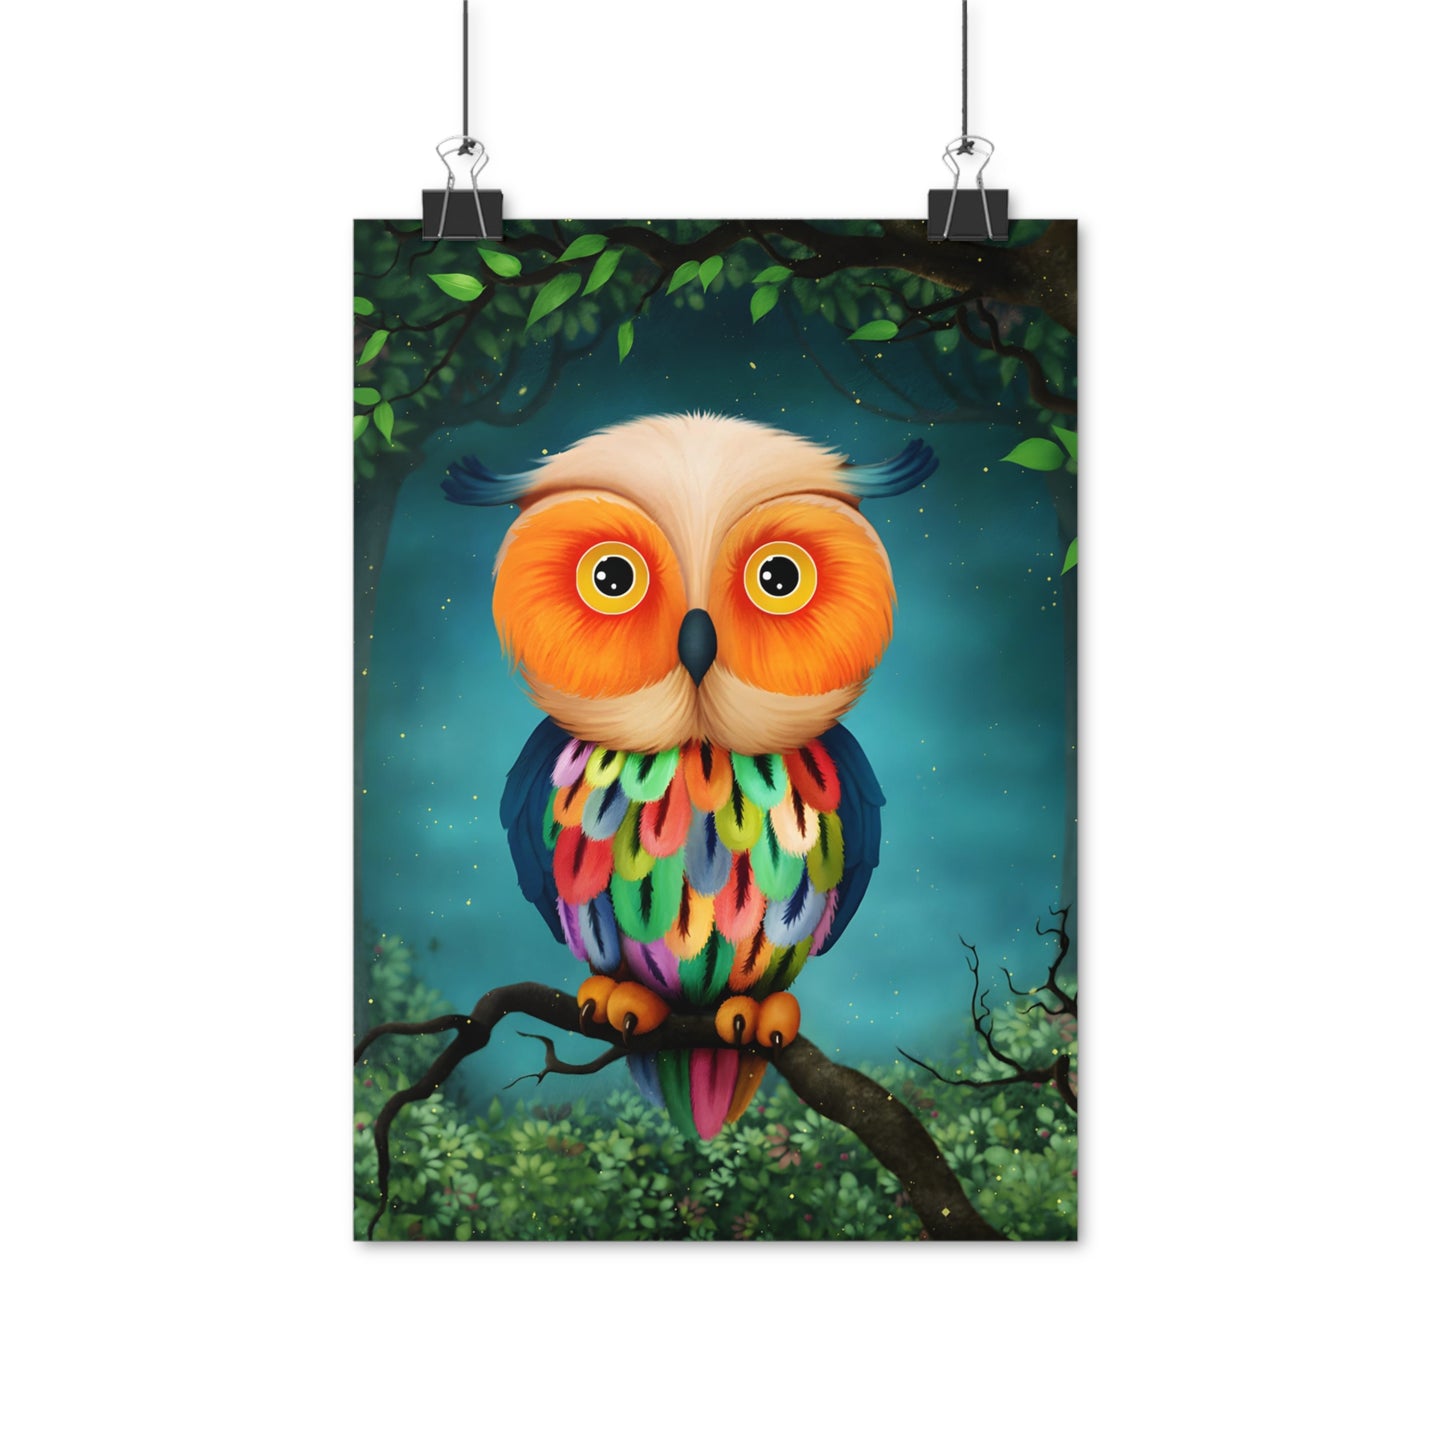 Posters - The Owl